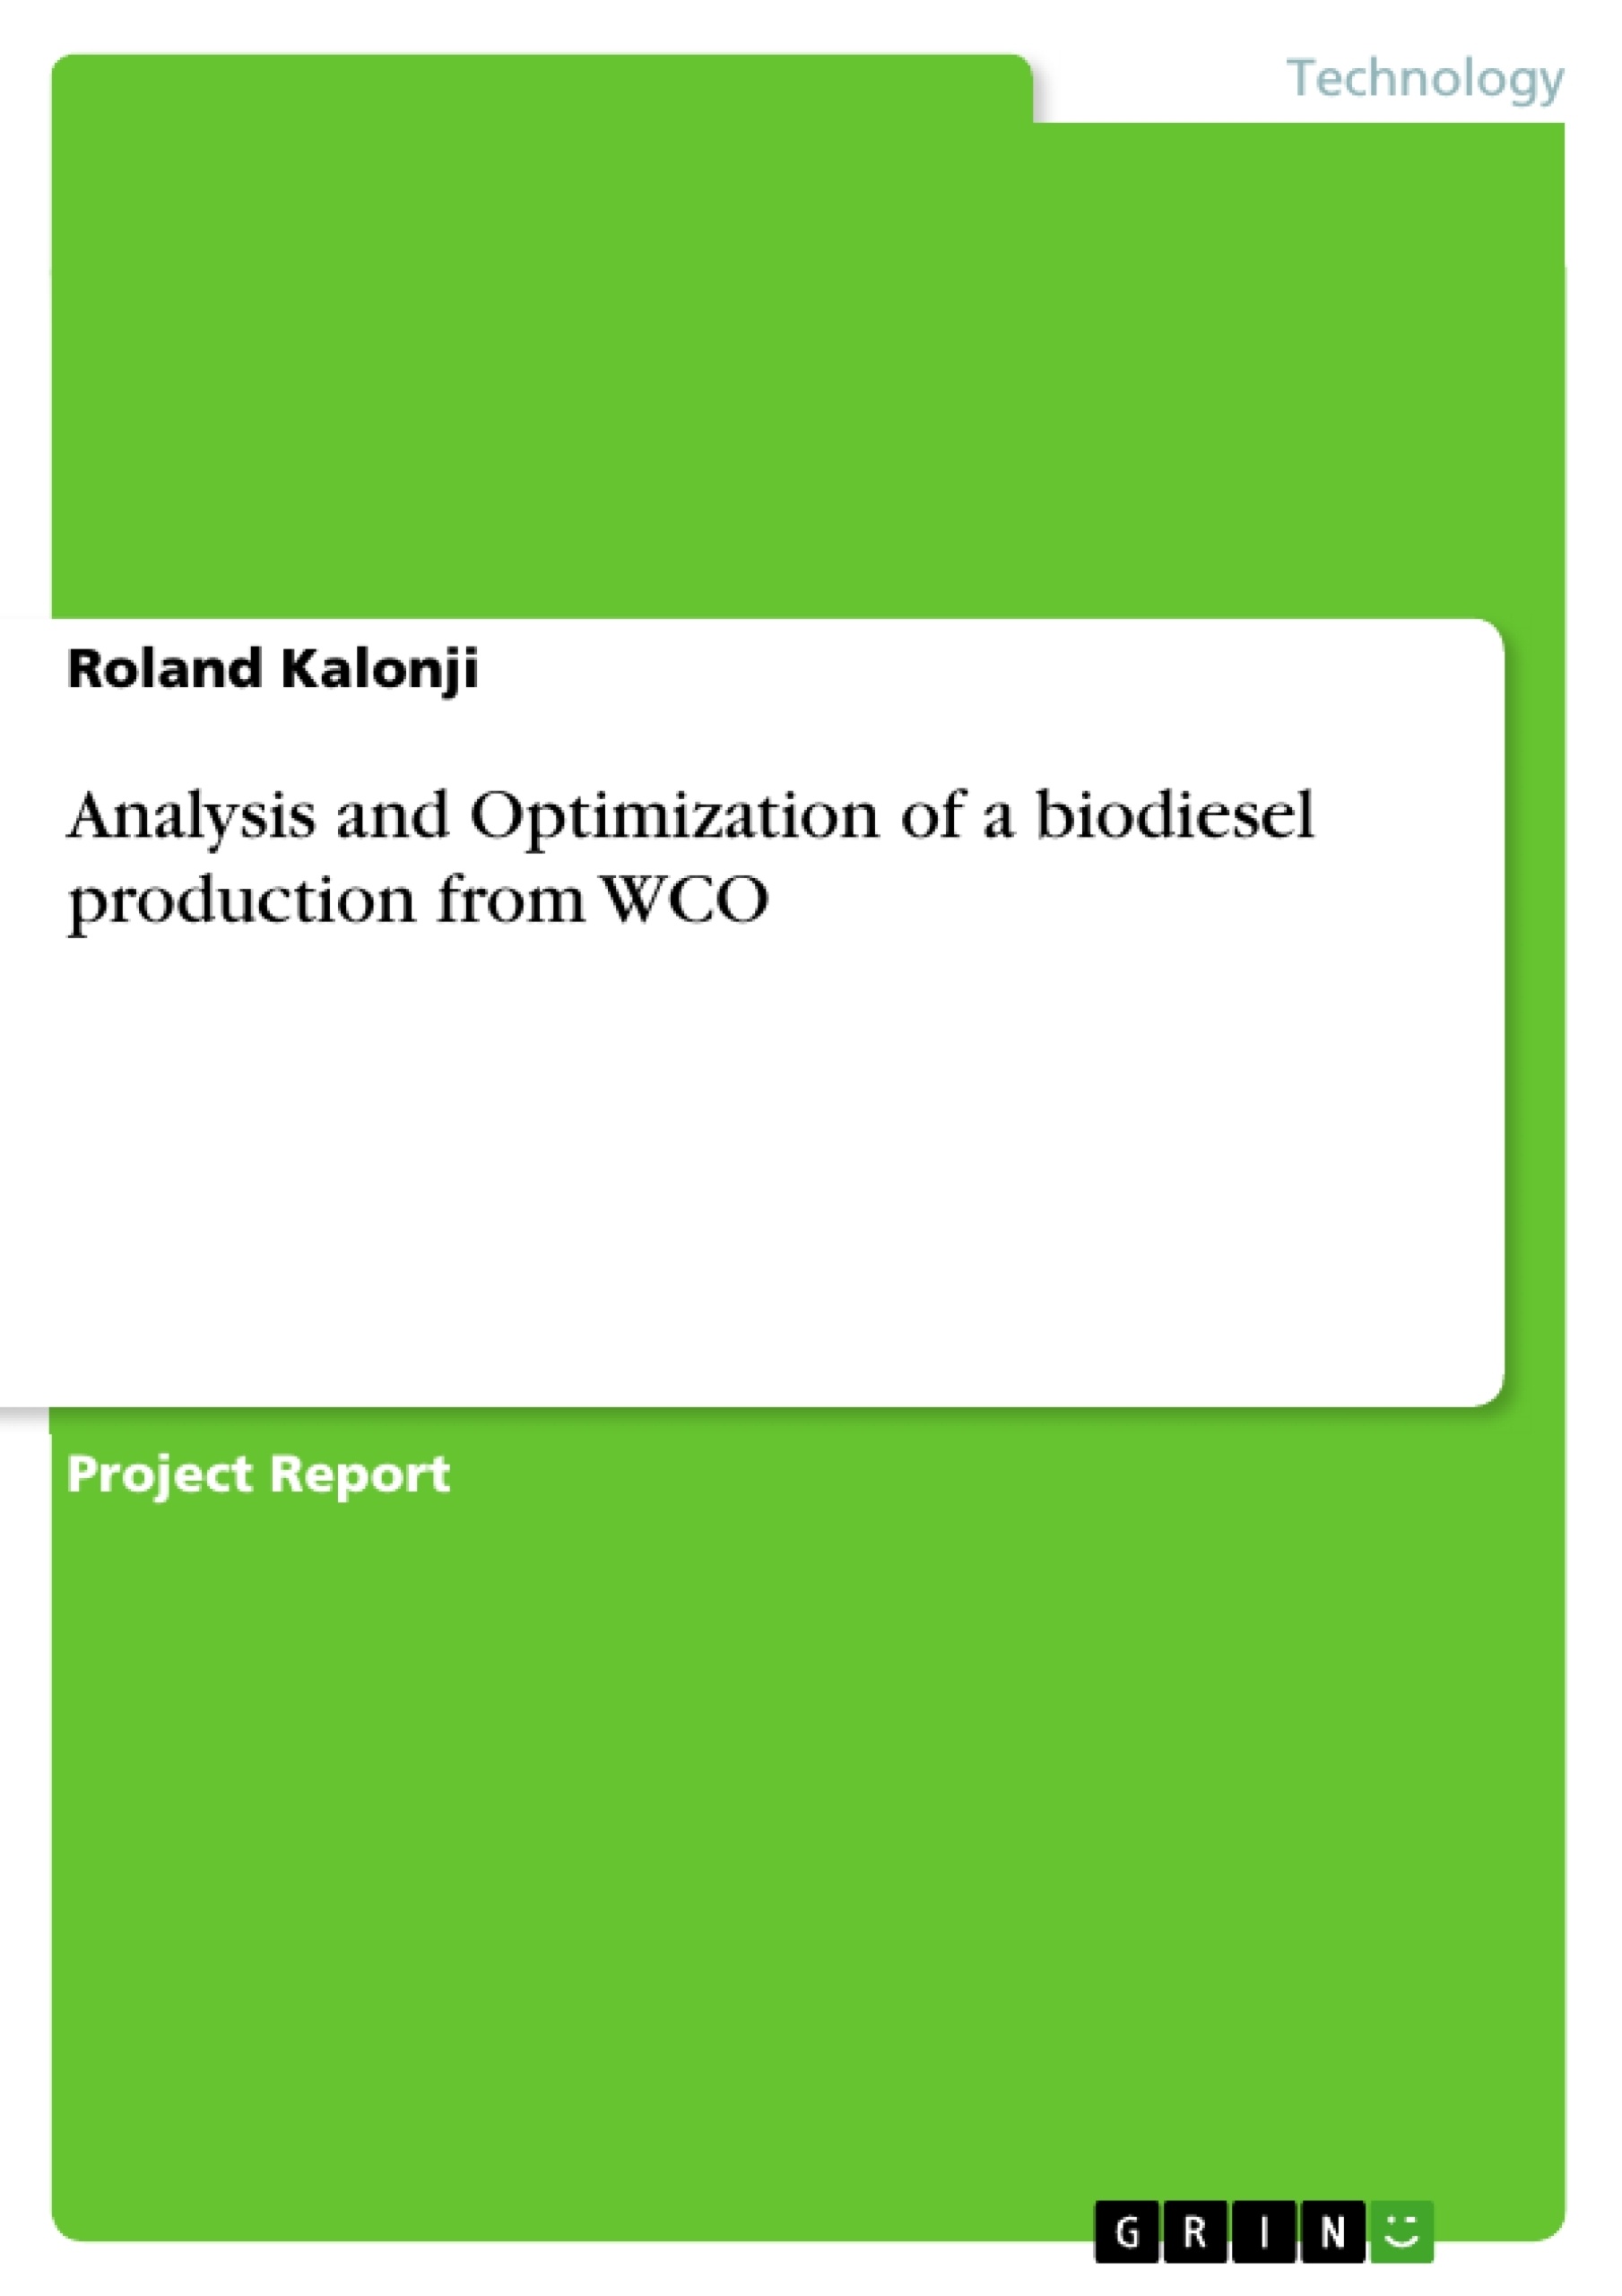 Title: Analysis and Optimization of a biodiesel production from WCO